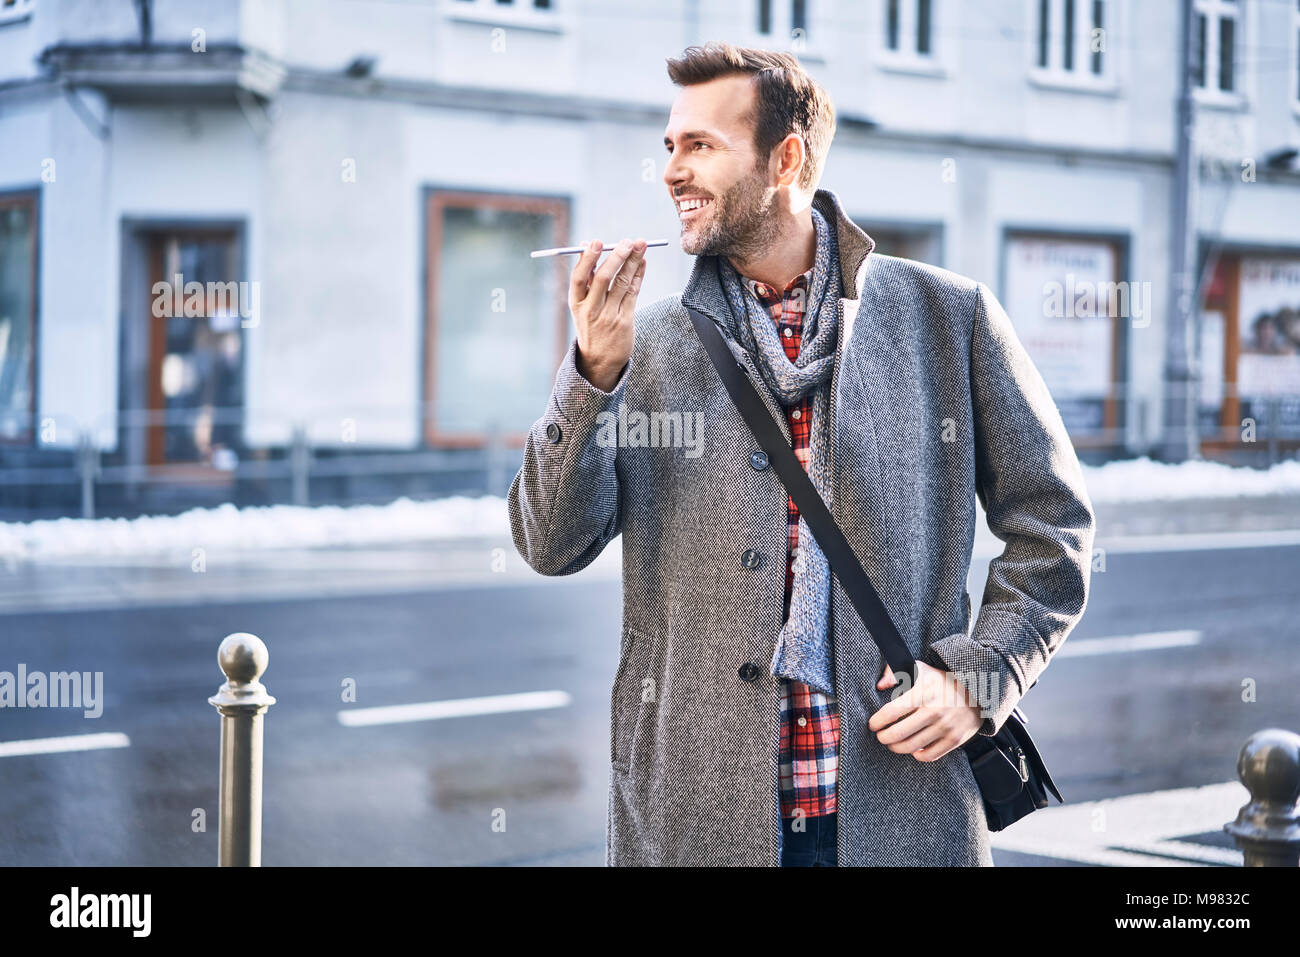 Man talking on the phone on city street during sunny winter day Stock Photo